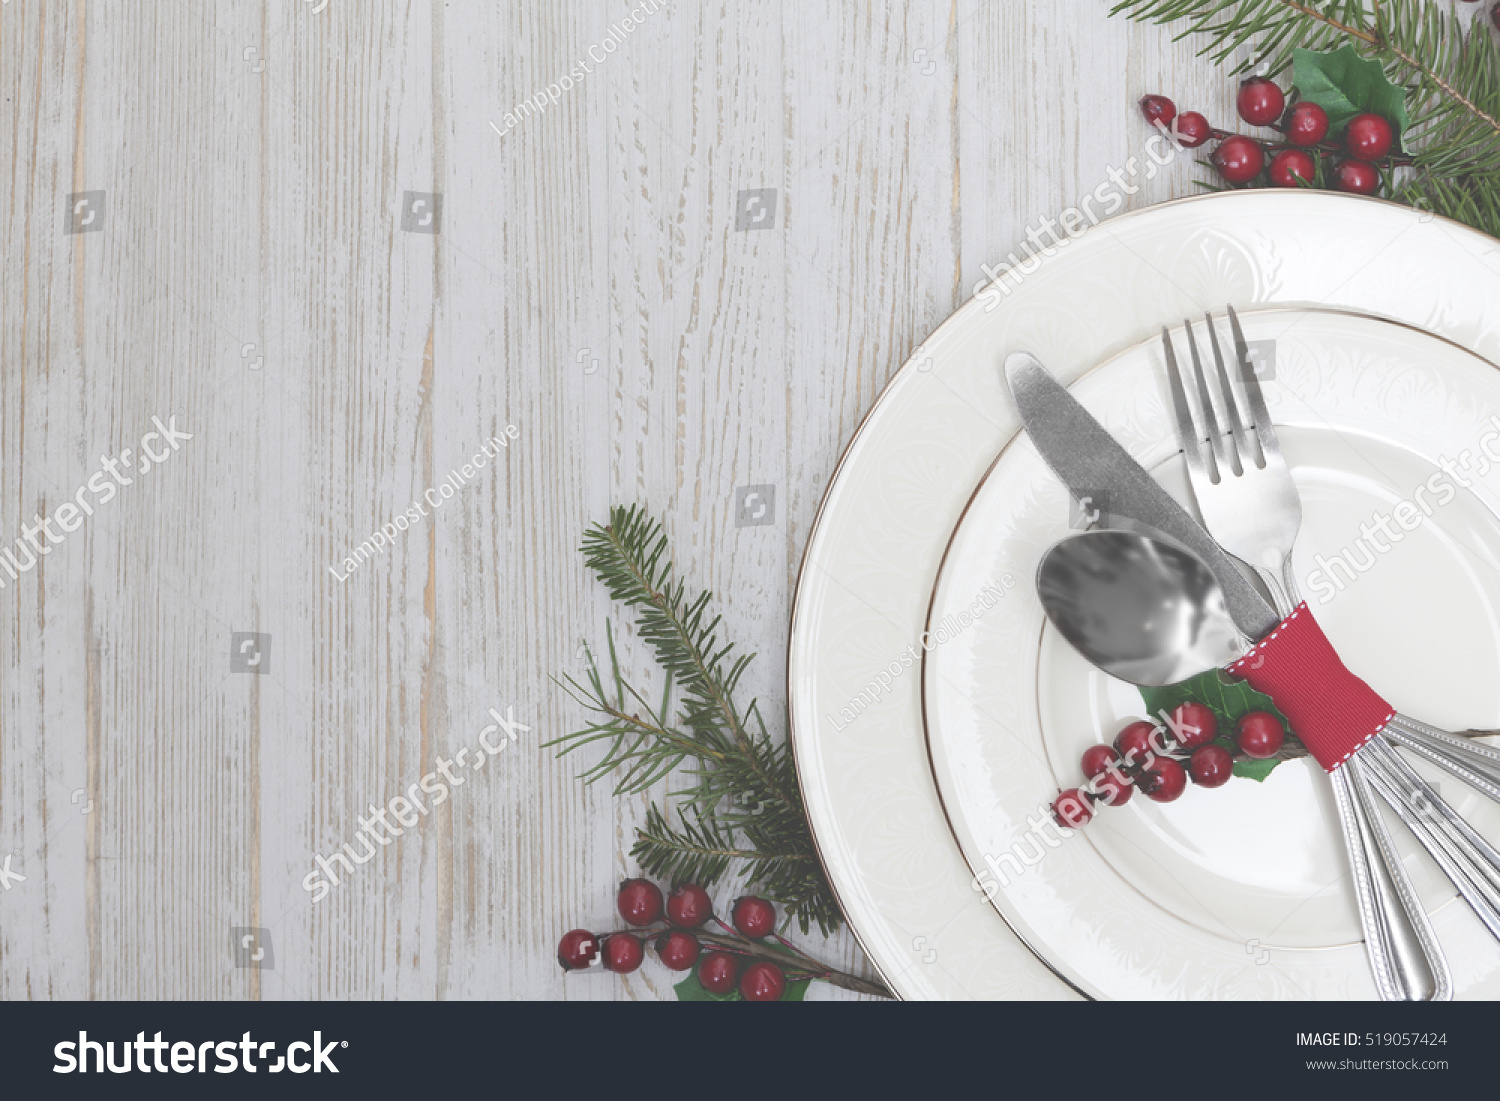 Christmas Meal Table Setting Background Stock Photo 519057424 ...